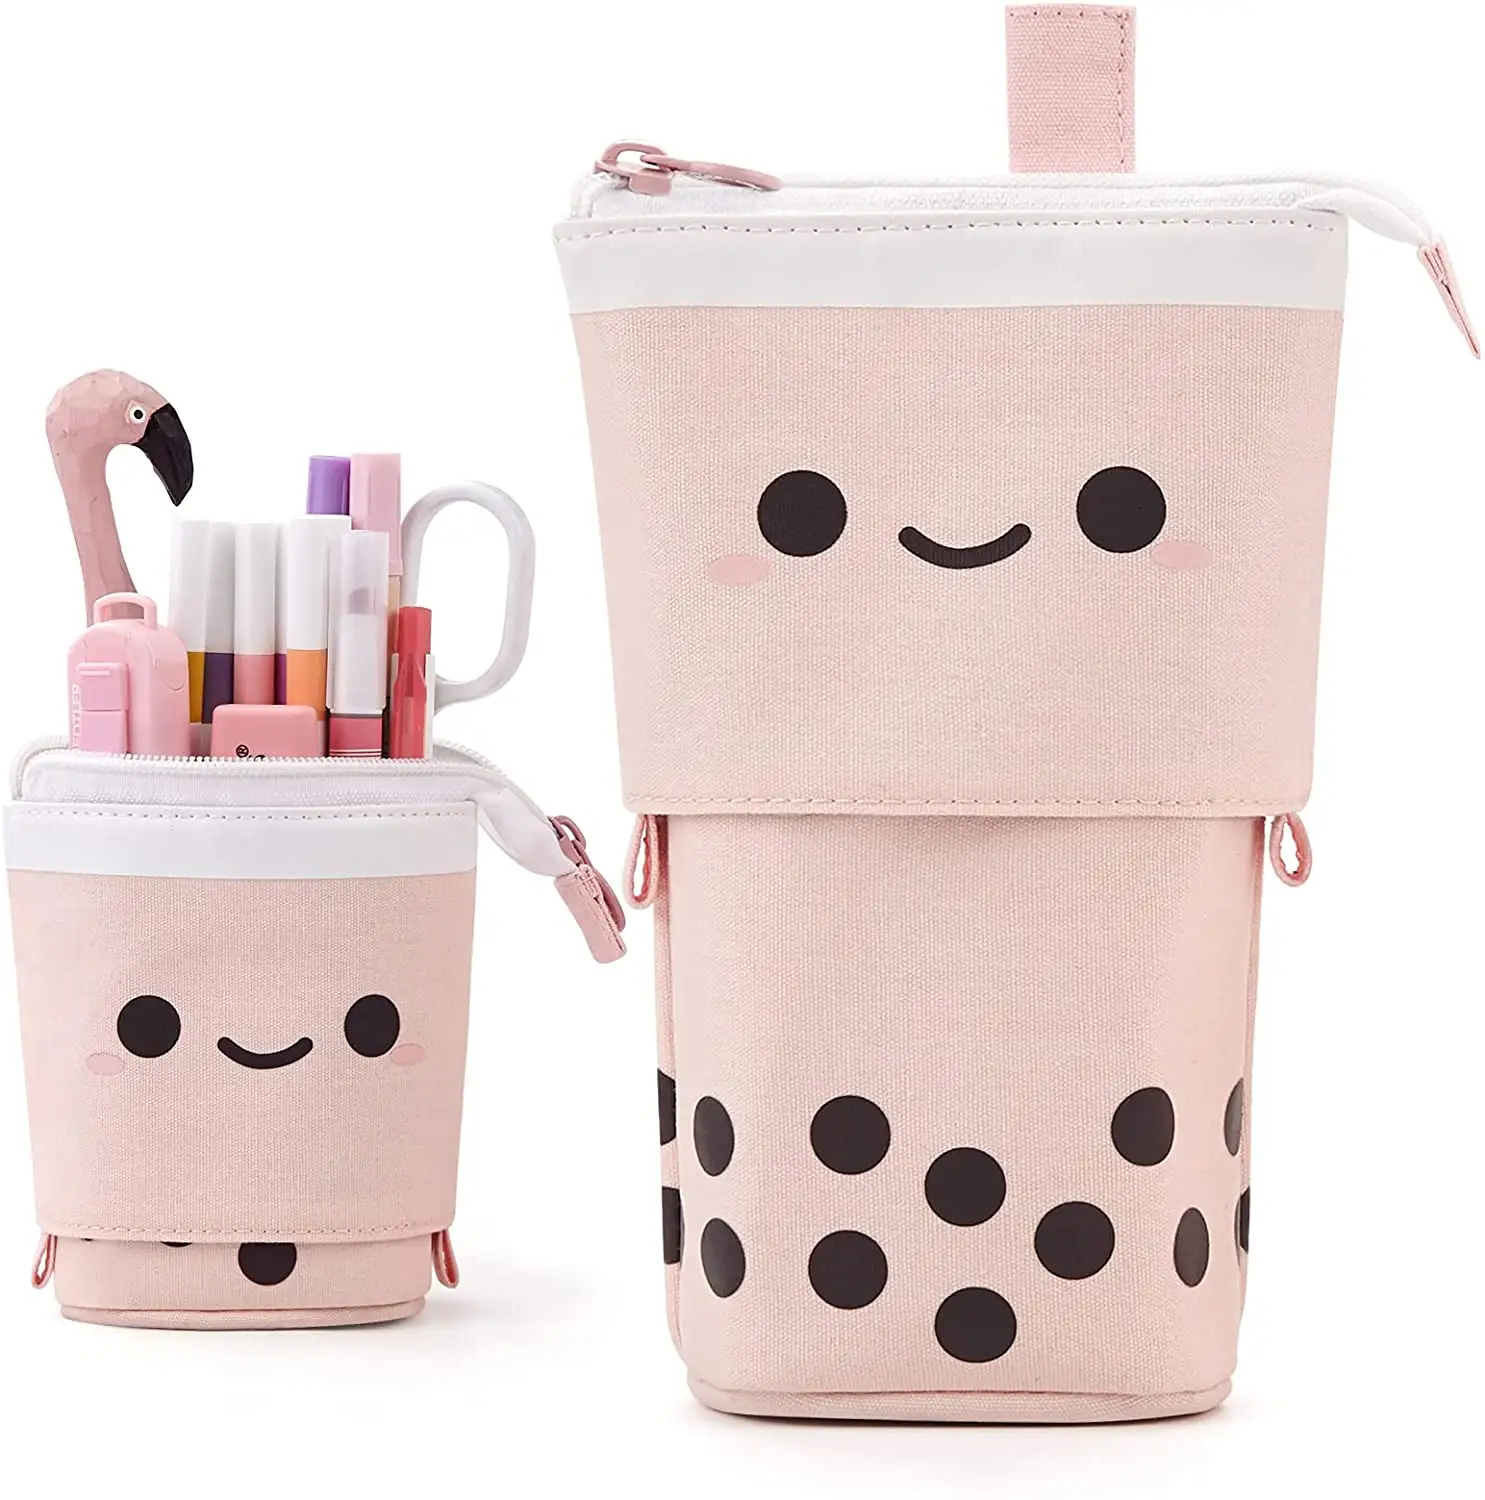 Cute Pencil Case Standing Pen Holder Telescopic Makeup Pouch Pop Up Cosmetics Bag with Kawaii Smile Face Stationery case